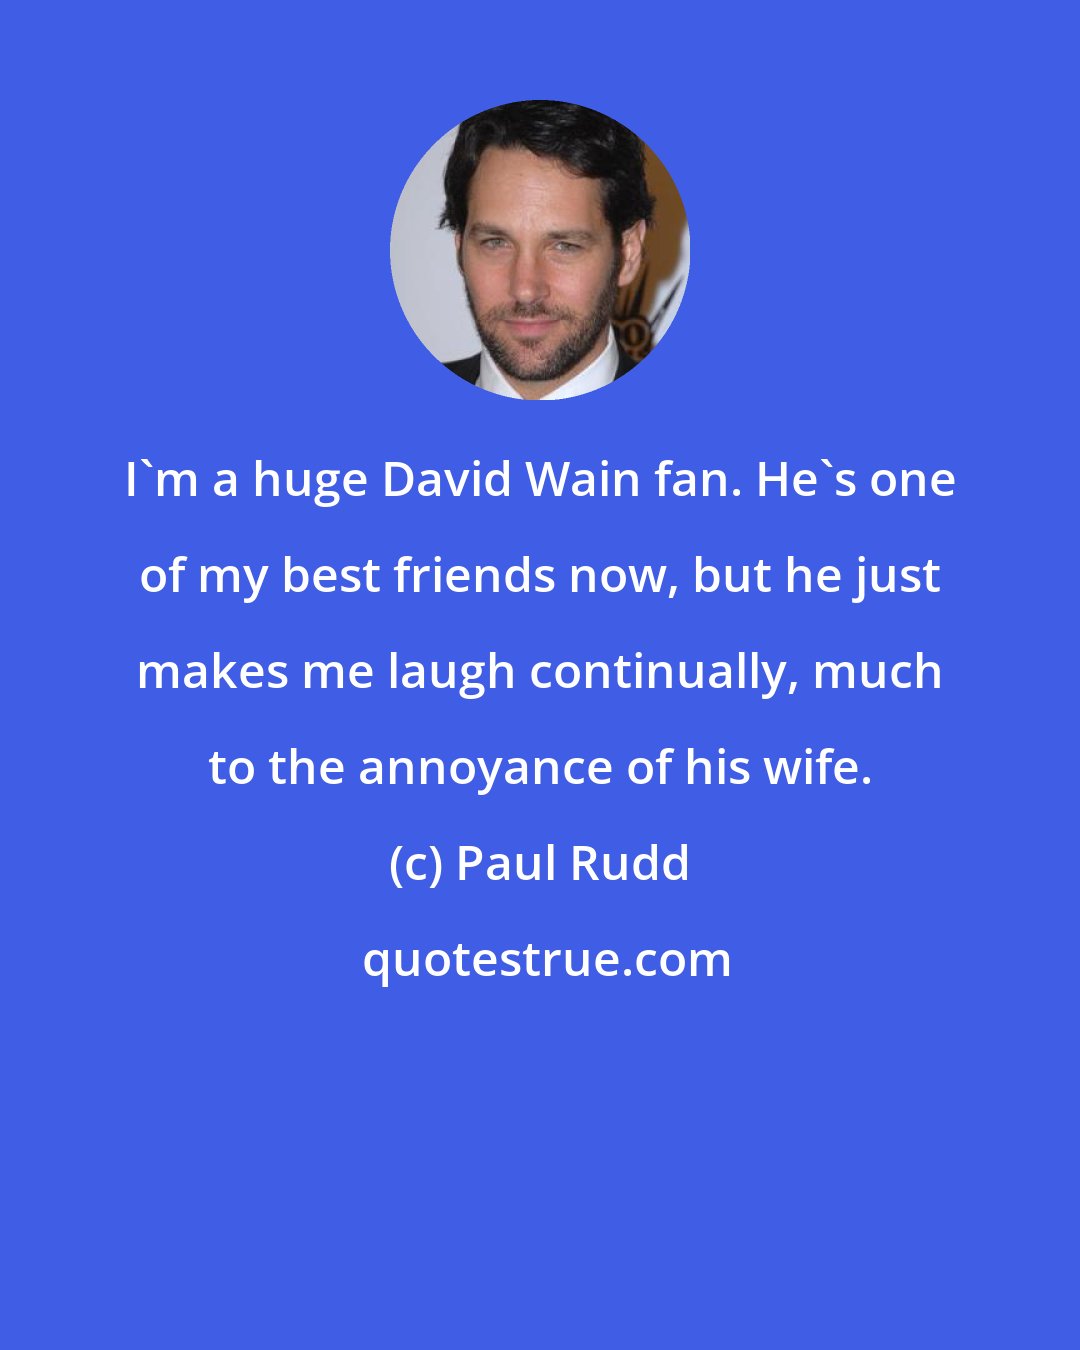 Paul Rudd: I'm a huge David Wain fan. He's one of my best friends now, but he just makes me laugh continually, much to the annoyance of his wife.